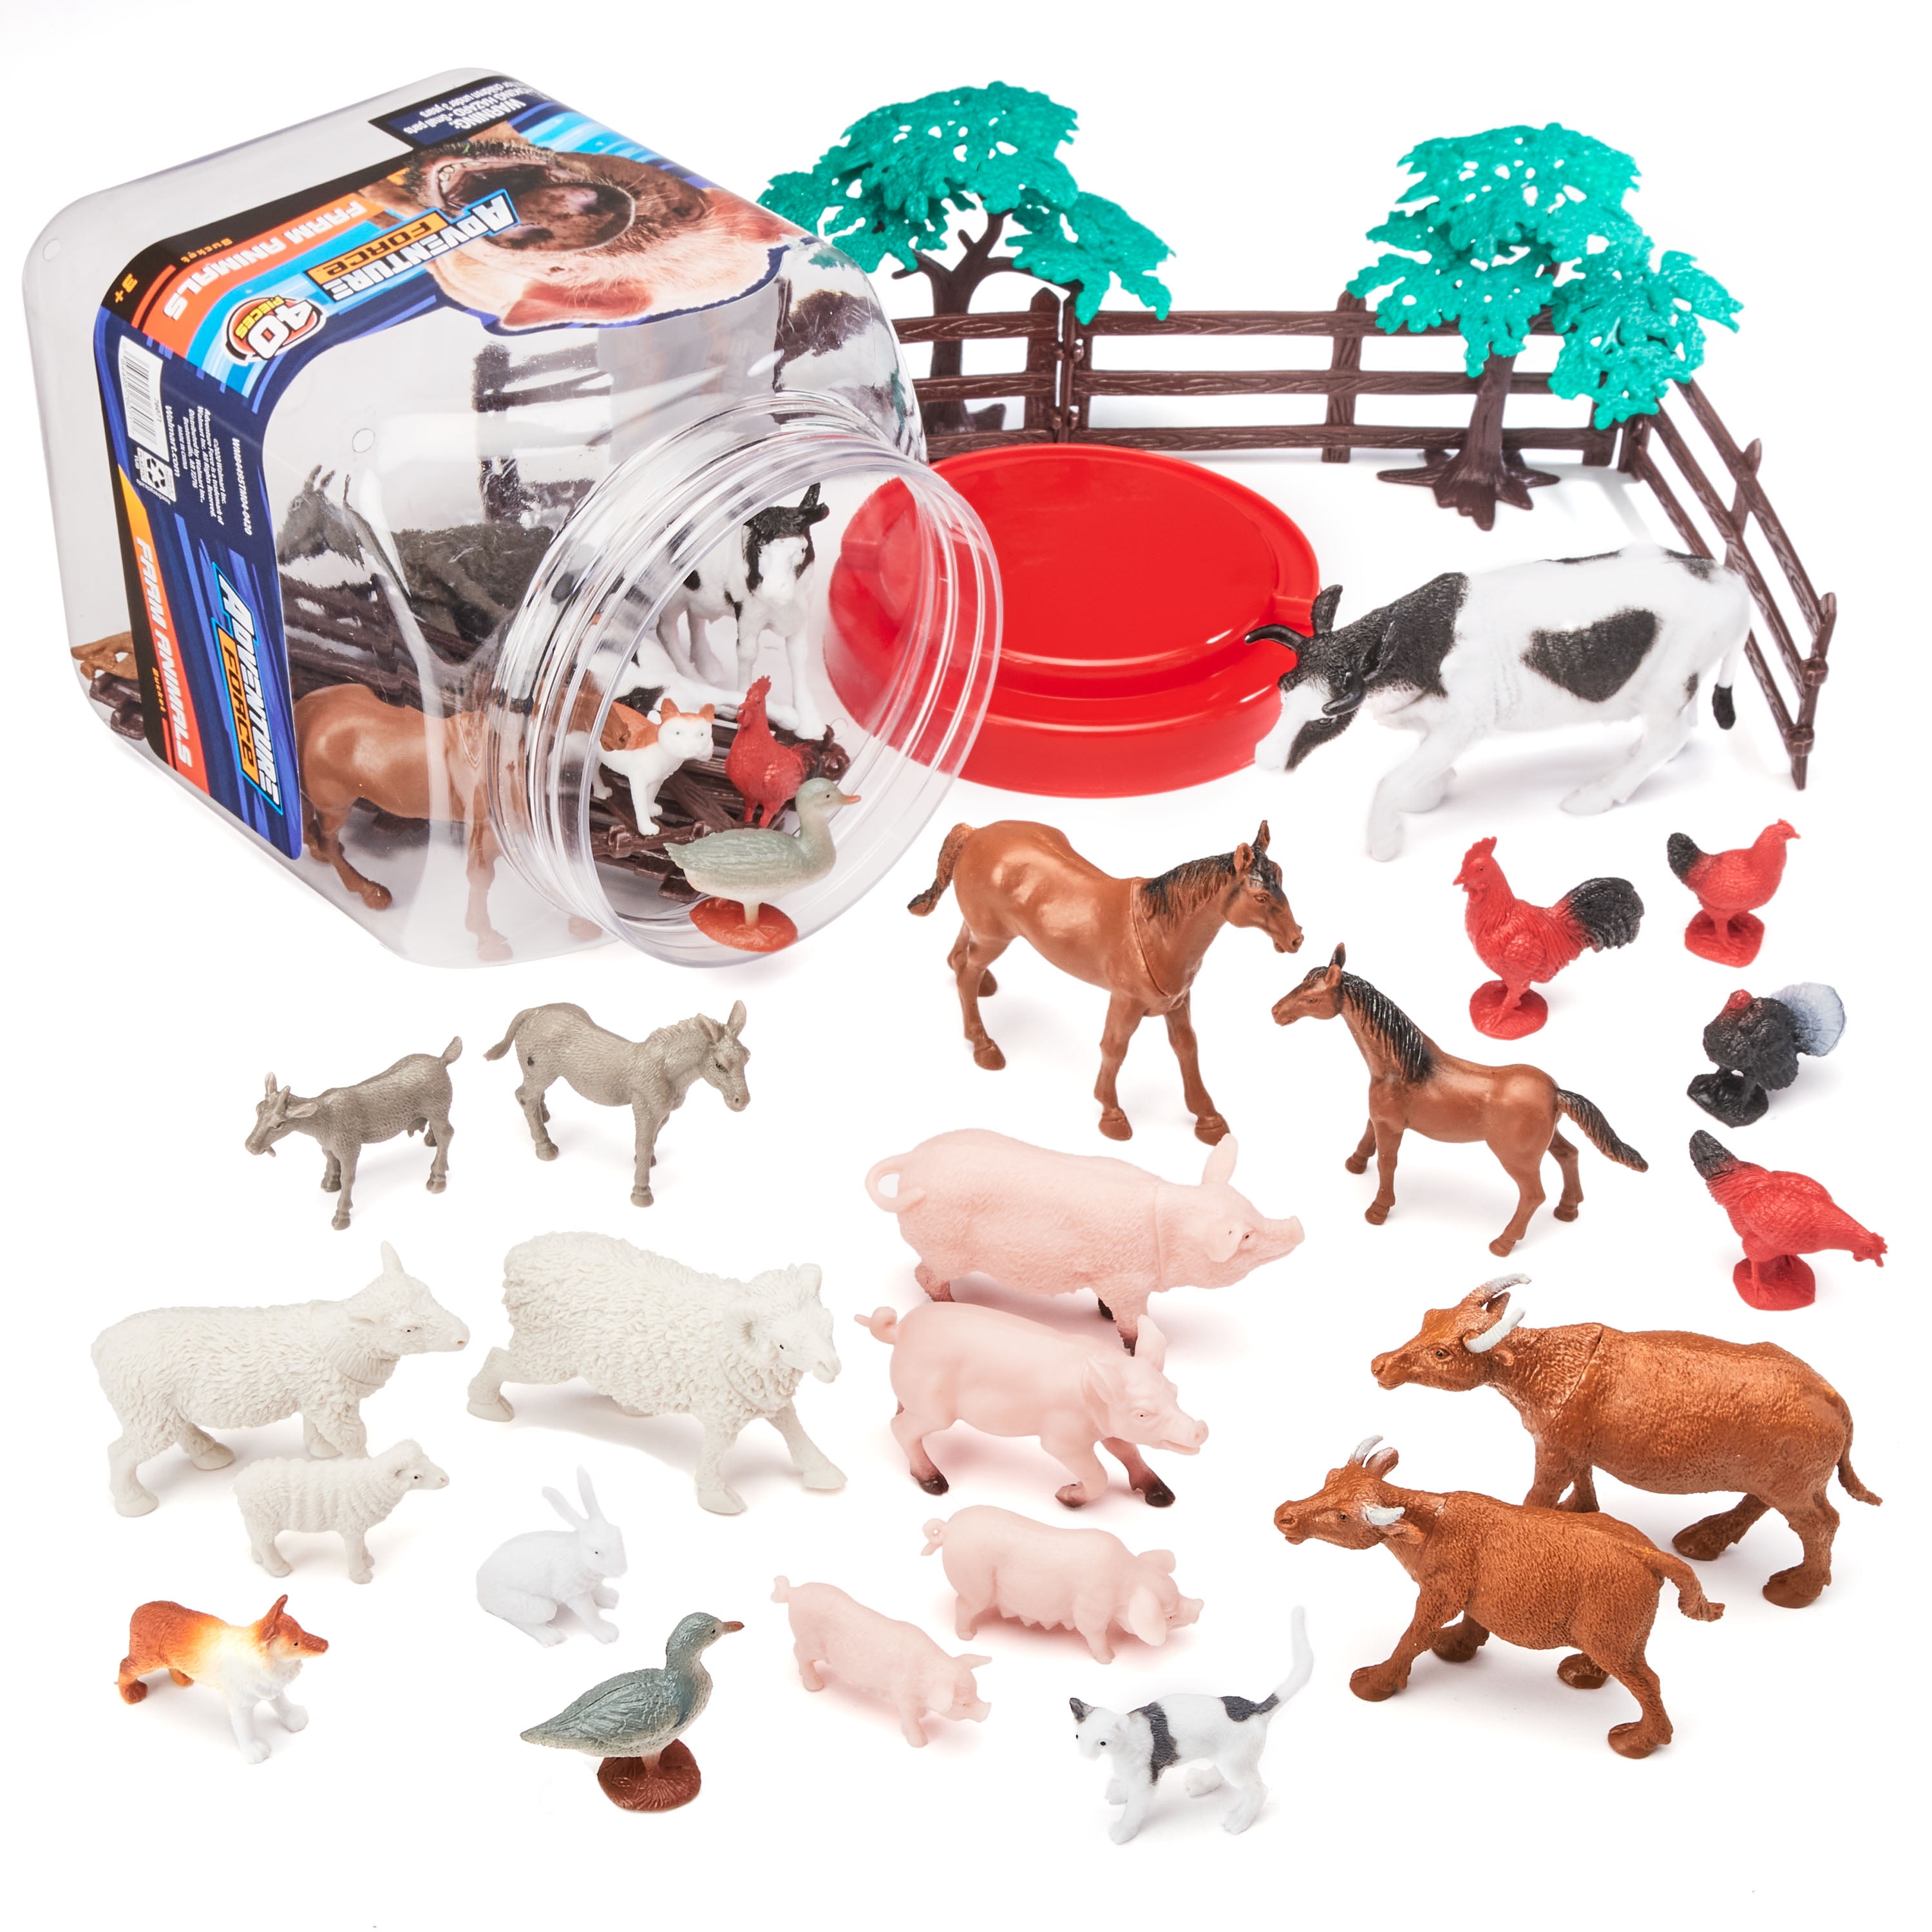 RUBBER CREATIVE PLAYTHINGS FARM ANIMALS Gorgeous 